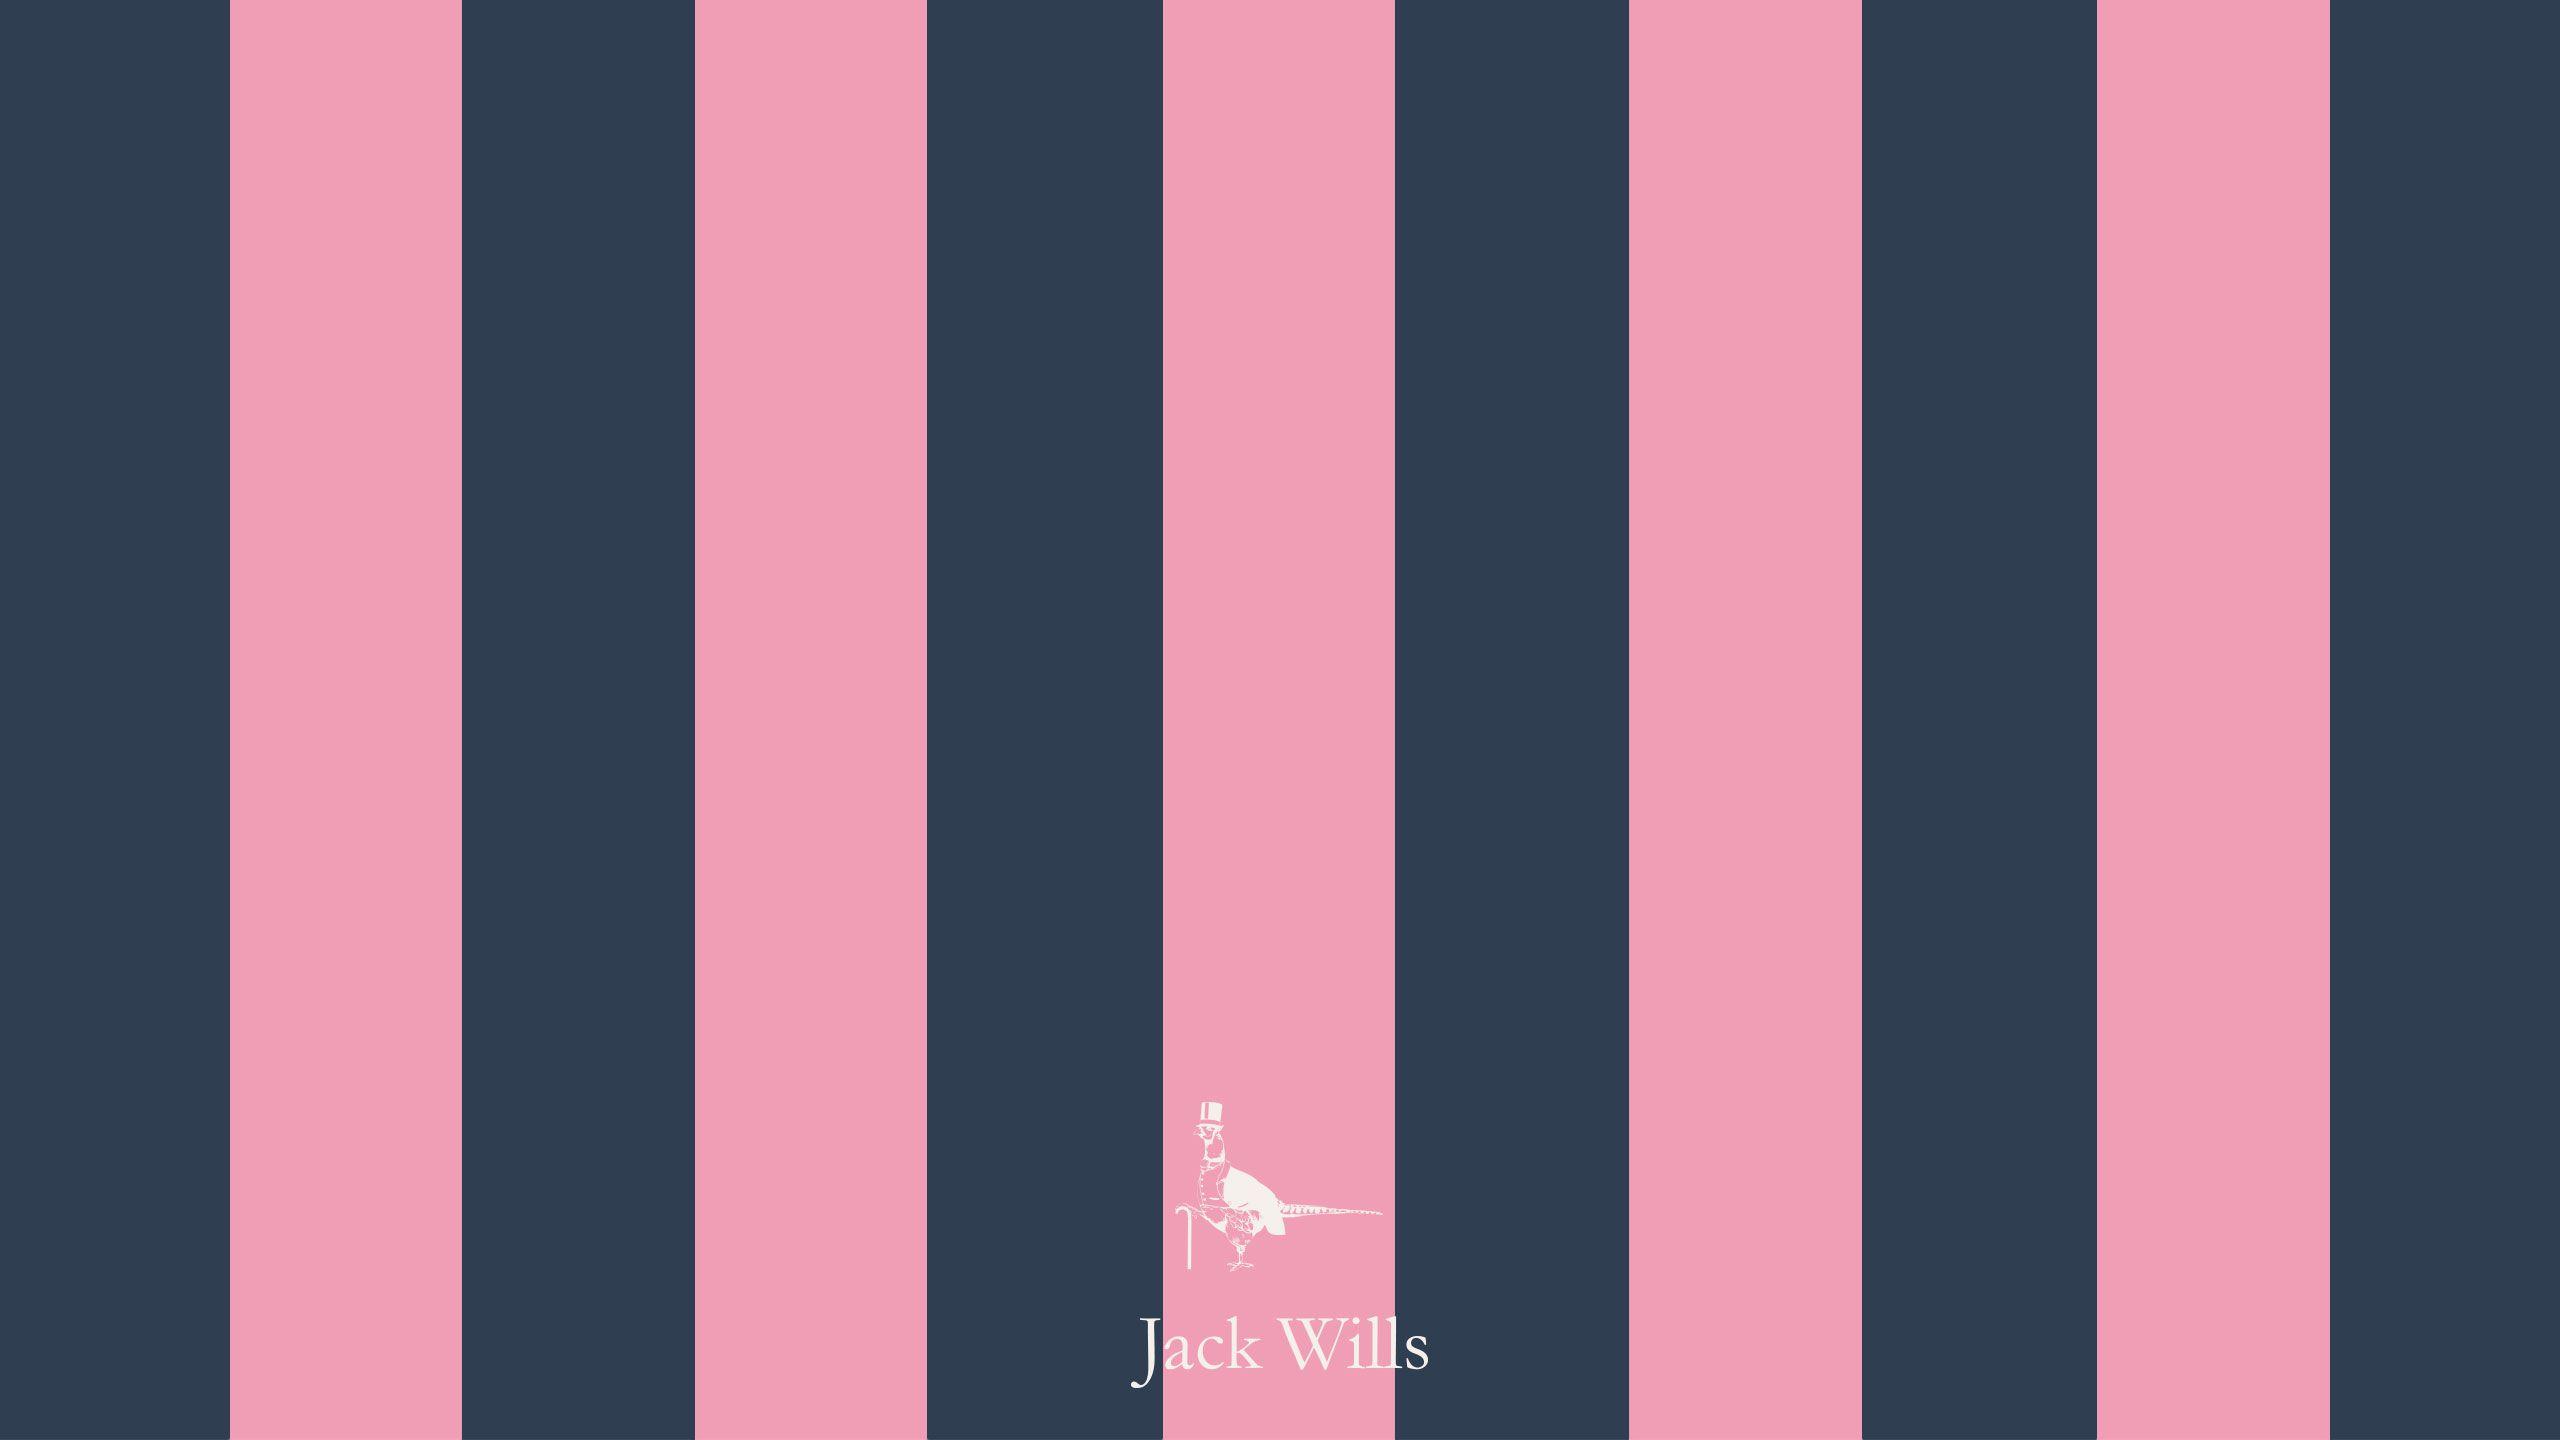 Pink Polos Backgrounds - Wallpaper Cave